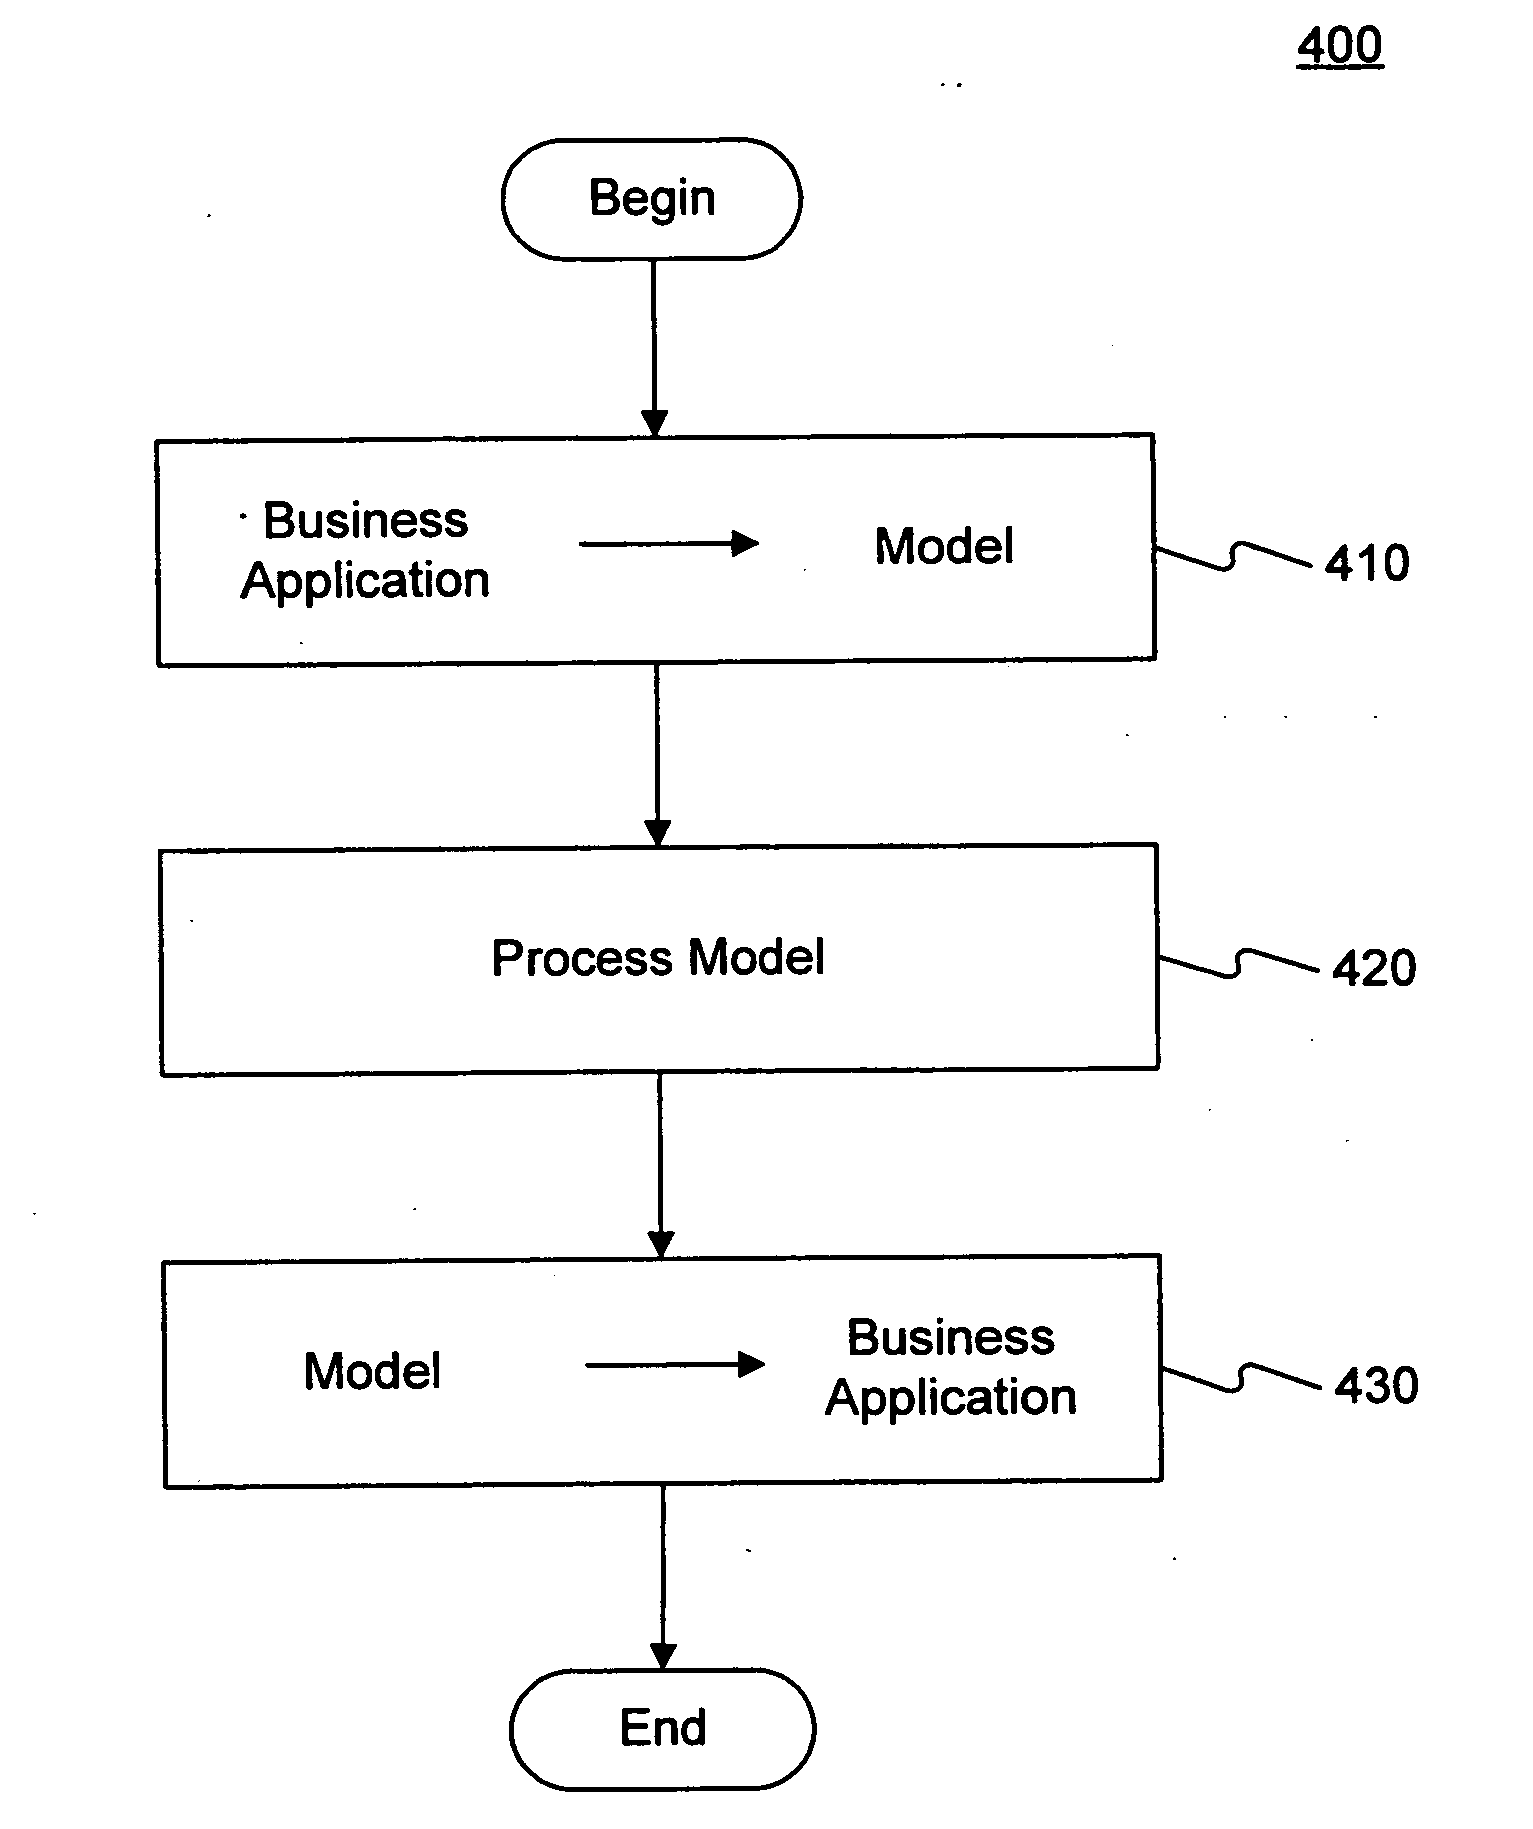 Methods of exposing a missing collection of application elements as deprecated